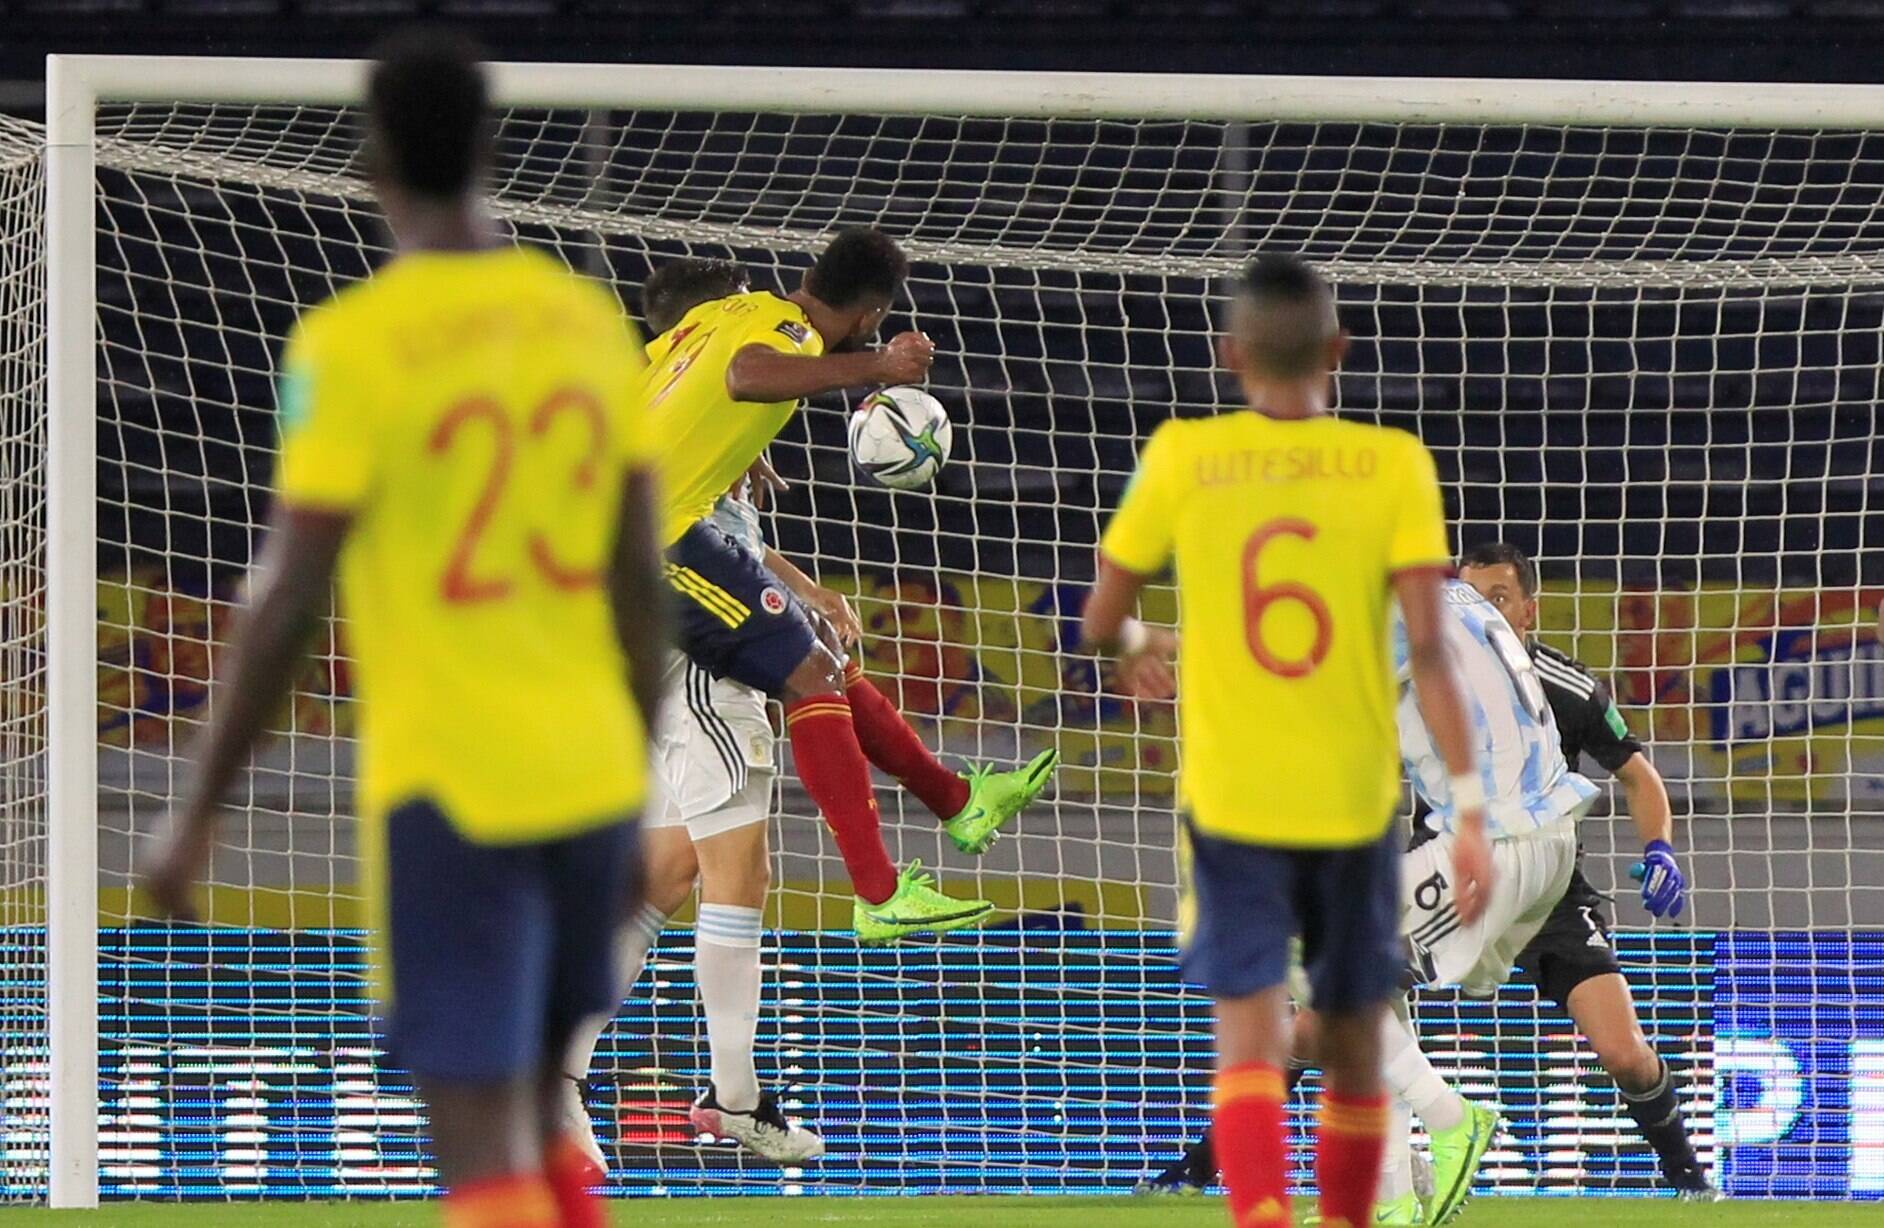 Colombia S Miguel Borja (2 L) Heads The Ball To Score His Goal Against Argentina, During A Match Amid The South American